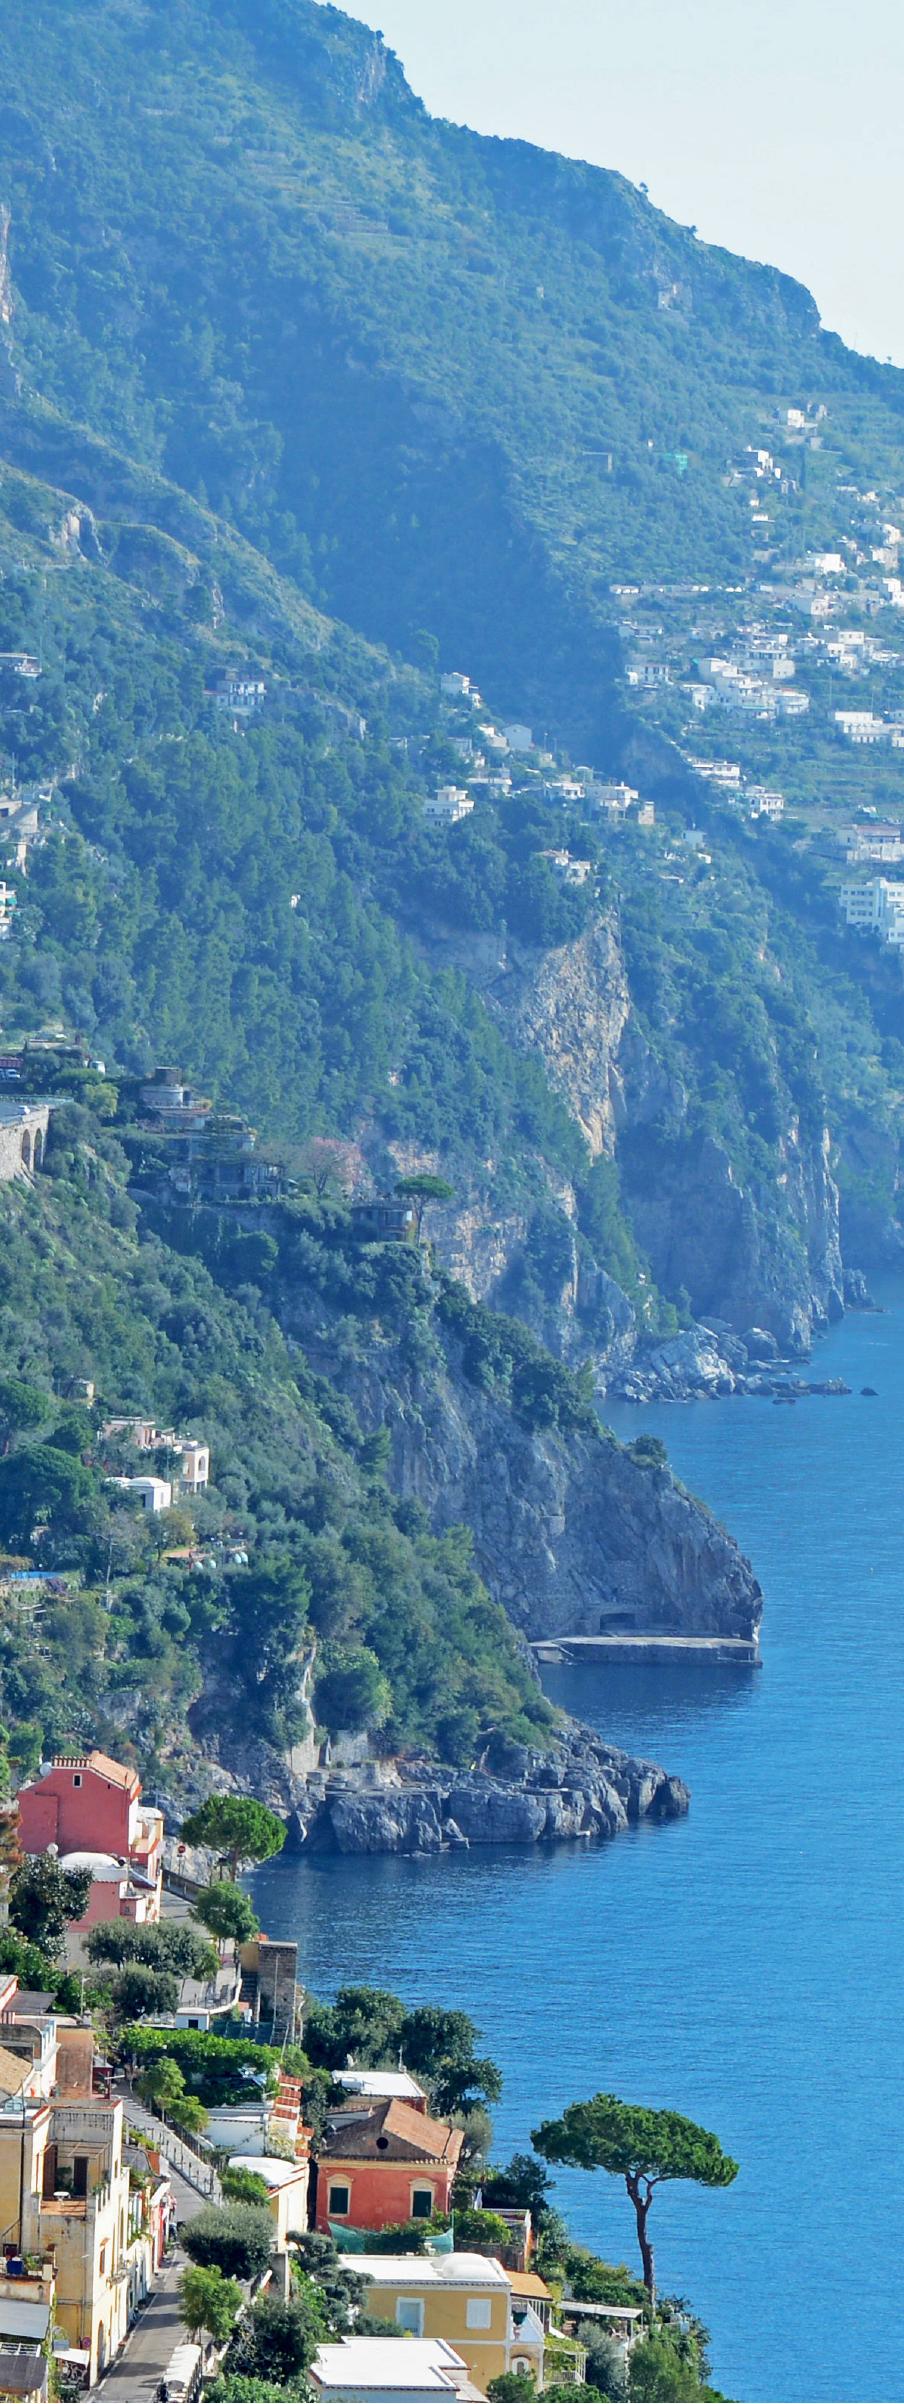 WHAT'S NEARBY Positano (beach, shopping, ferries) 5-20 minutes Sorrento (beach, ferries, shopping, restaurants) 30 minutes Capri 30-40 minutes by boat Ravello, Amalfi, Naples (airport, concerts,